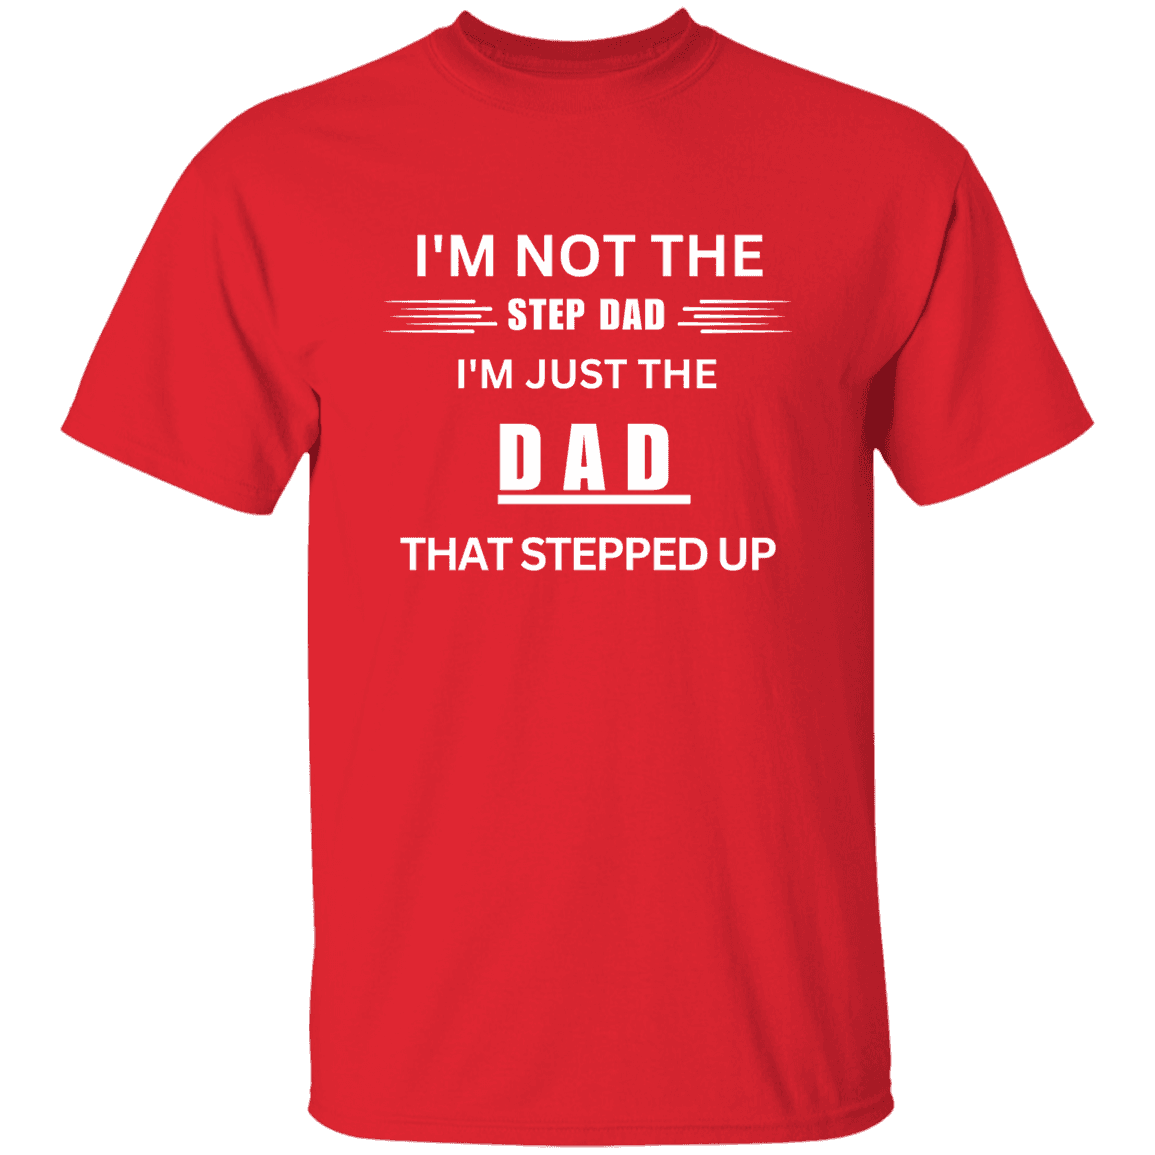 Front of the red Stepped Up Dad t-shirt. Material is heavyweight 100% cotton in a classic unisex t-shirt style. Printed in white letters on the chest is the phrase: "I'm not the Step Dad, I'm just the DAD that stepped up"